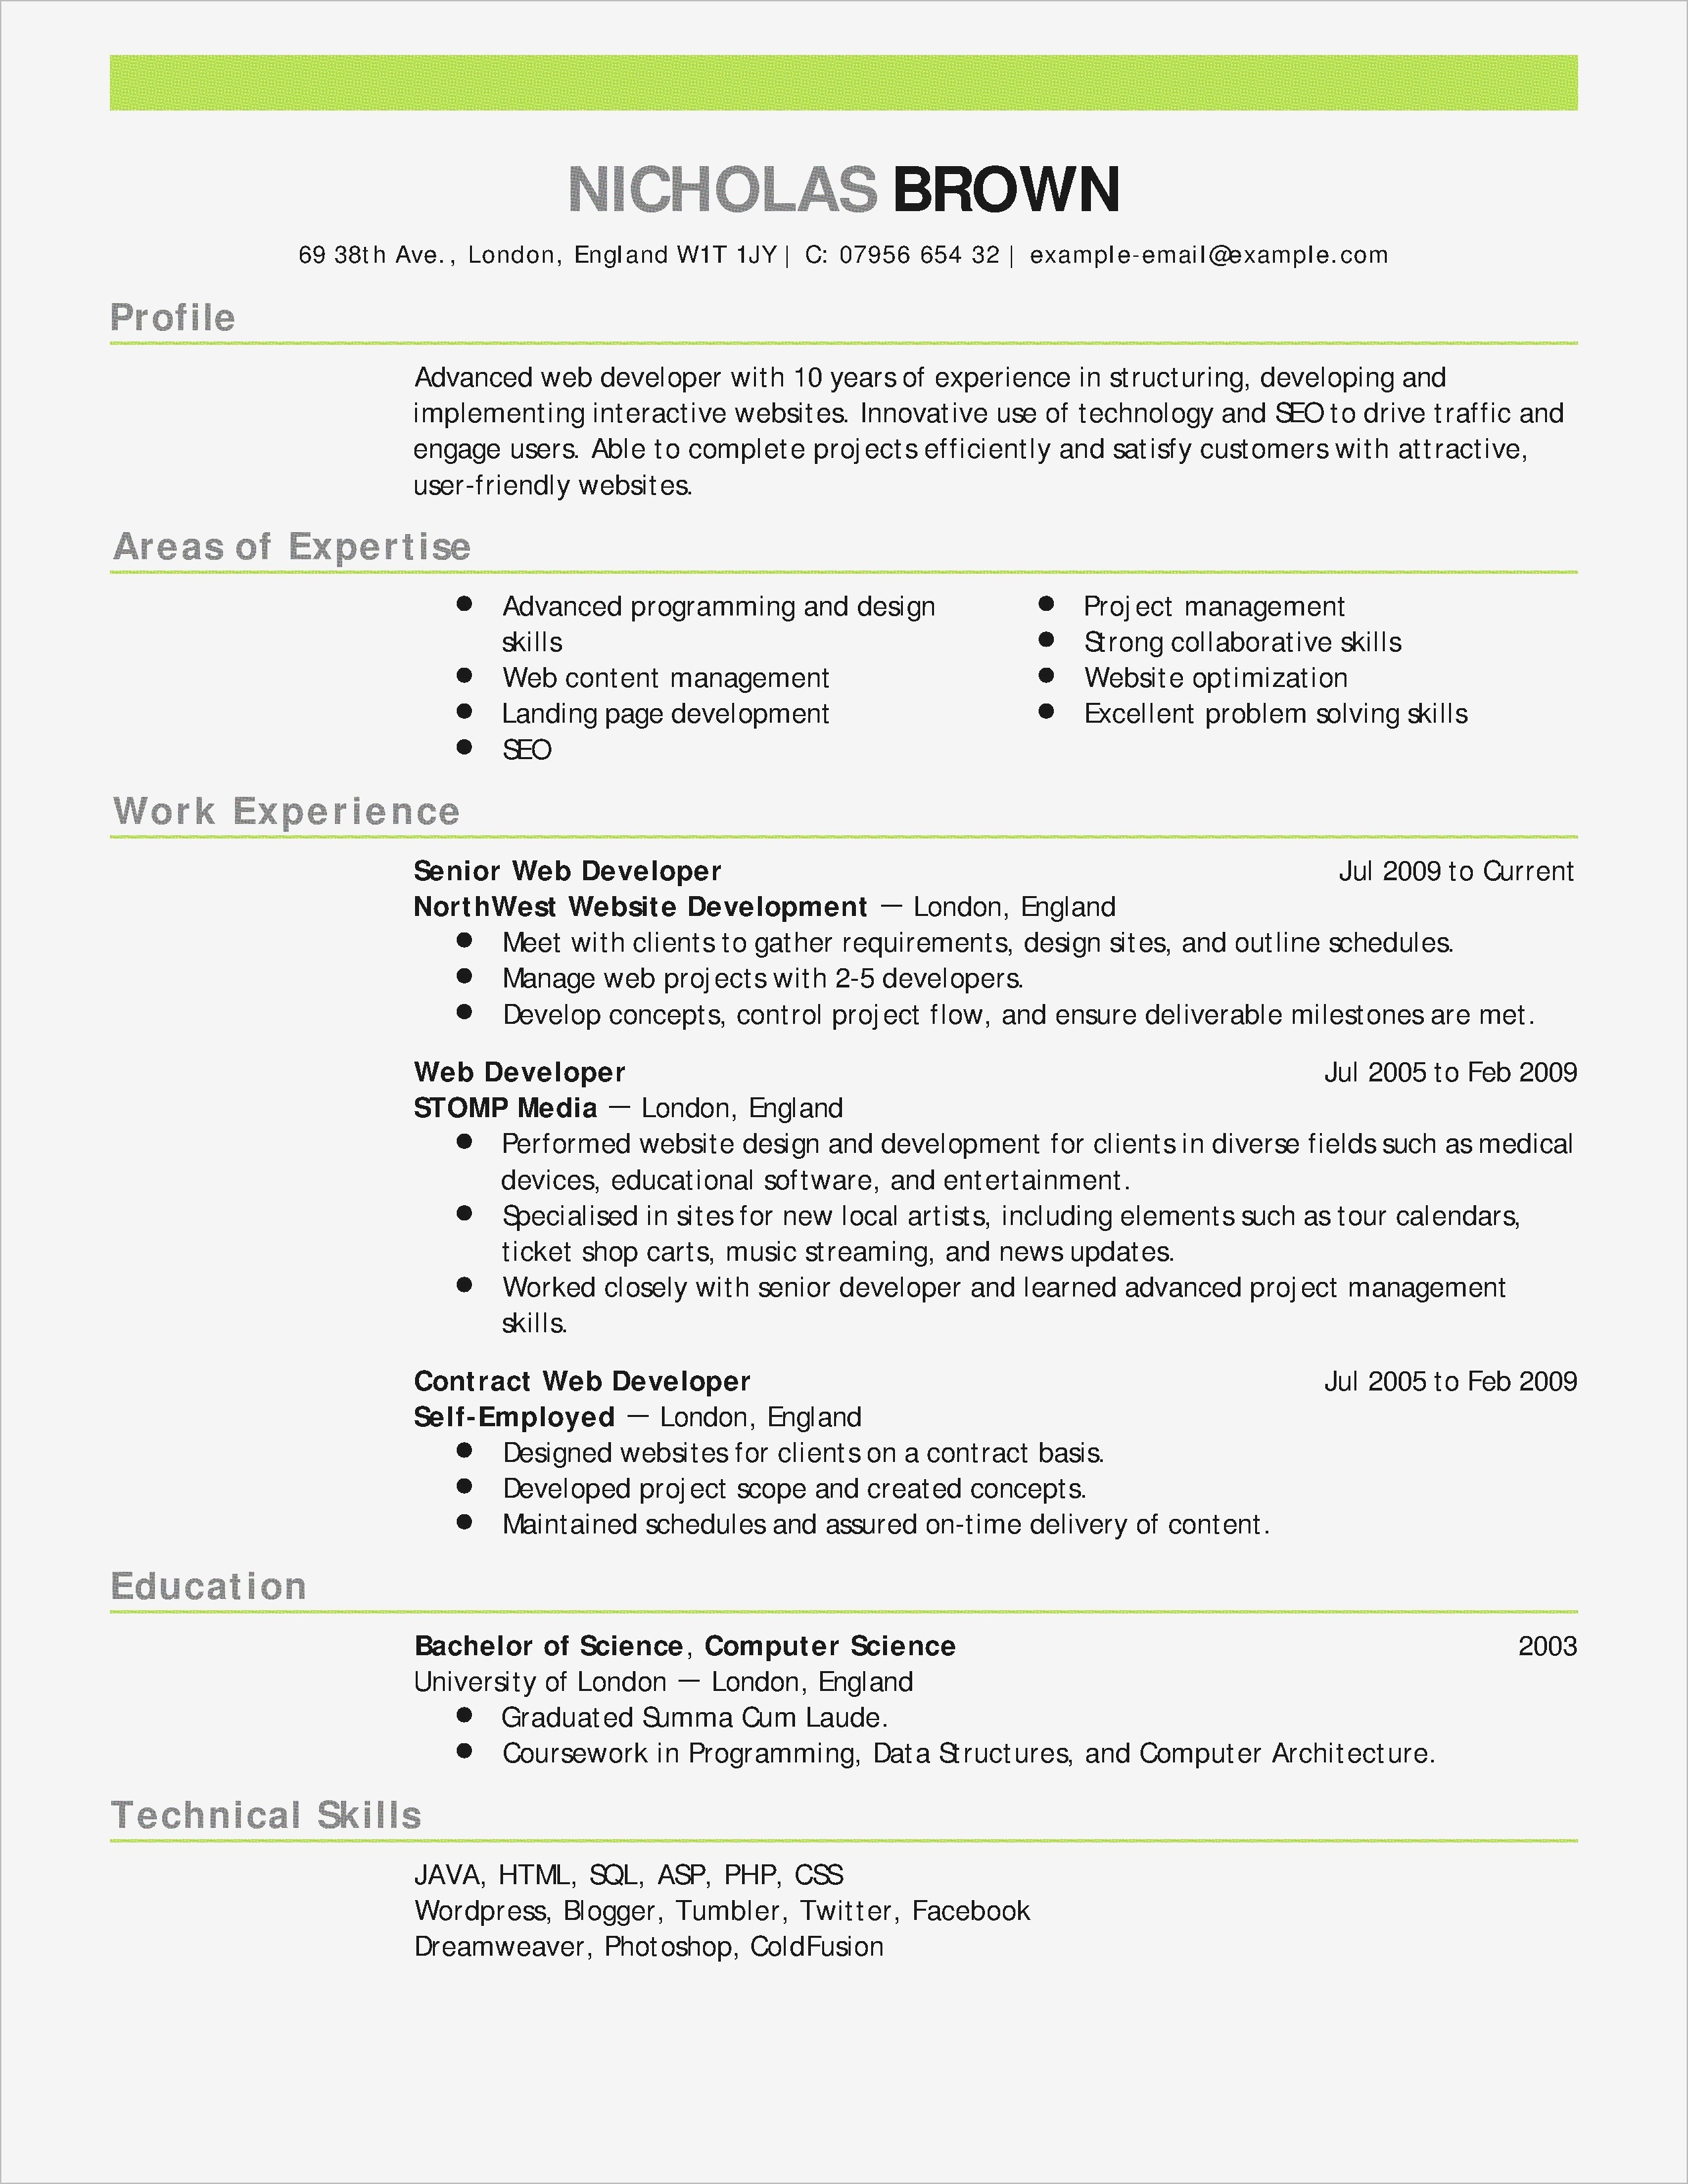 How To Type A Resume How To Type A Letter In Word Best Of Resume With References Awesome Inspirational Examples Resumes Photograph Of How To Type A Letter In Word how to type a resume|wikiresume.com